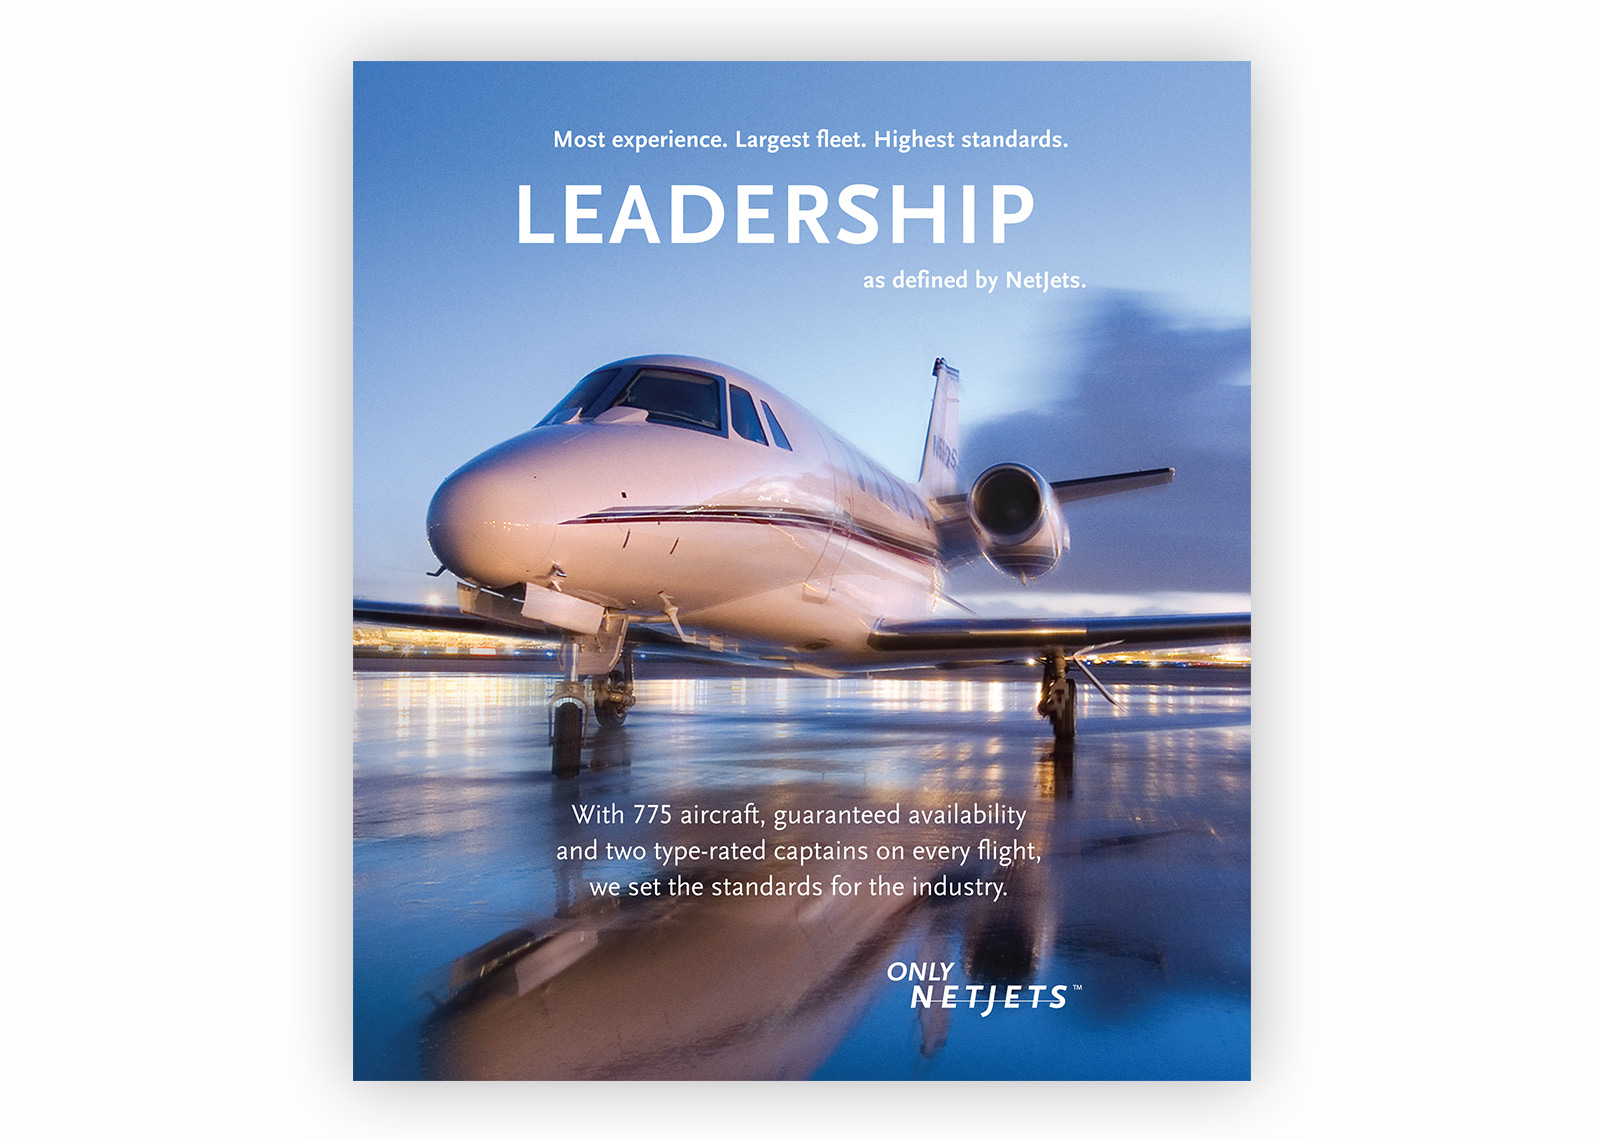 This image depicts a project for NetJets